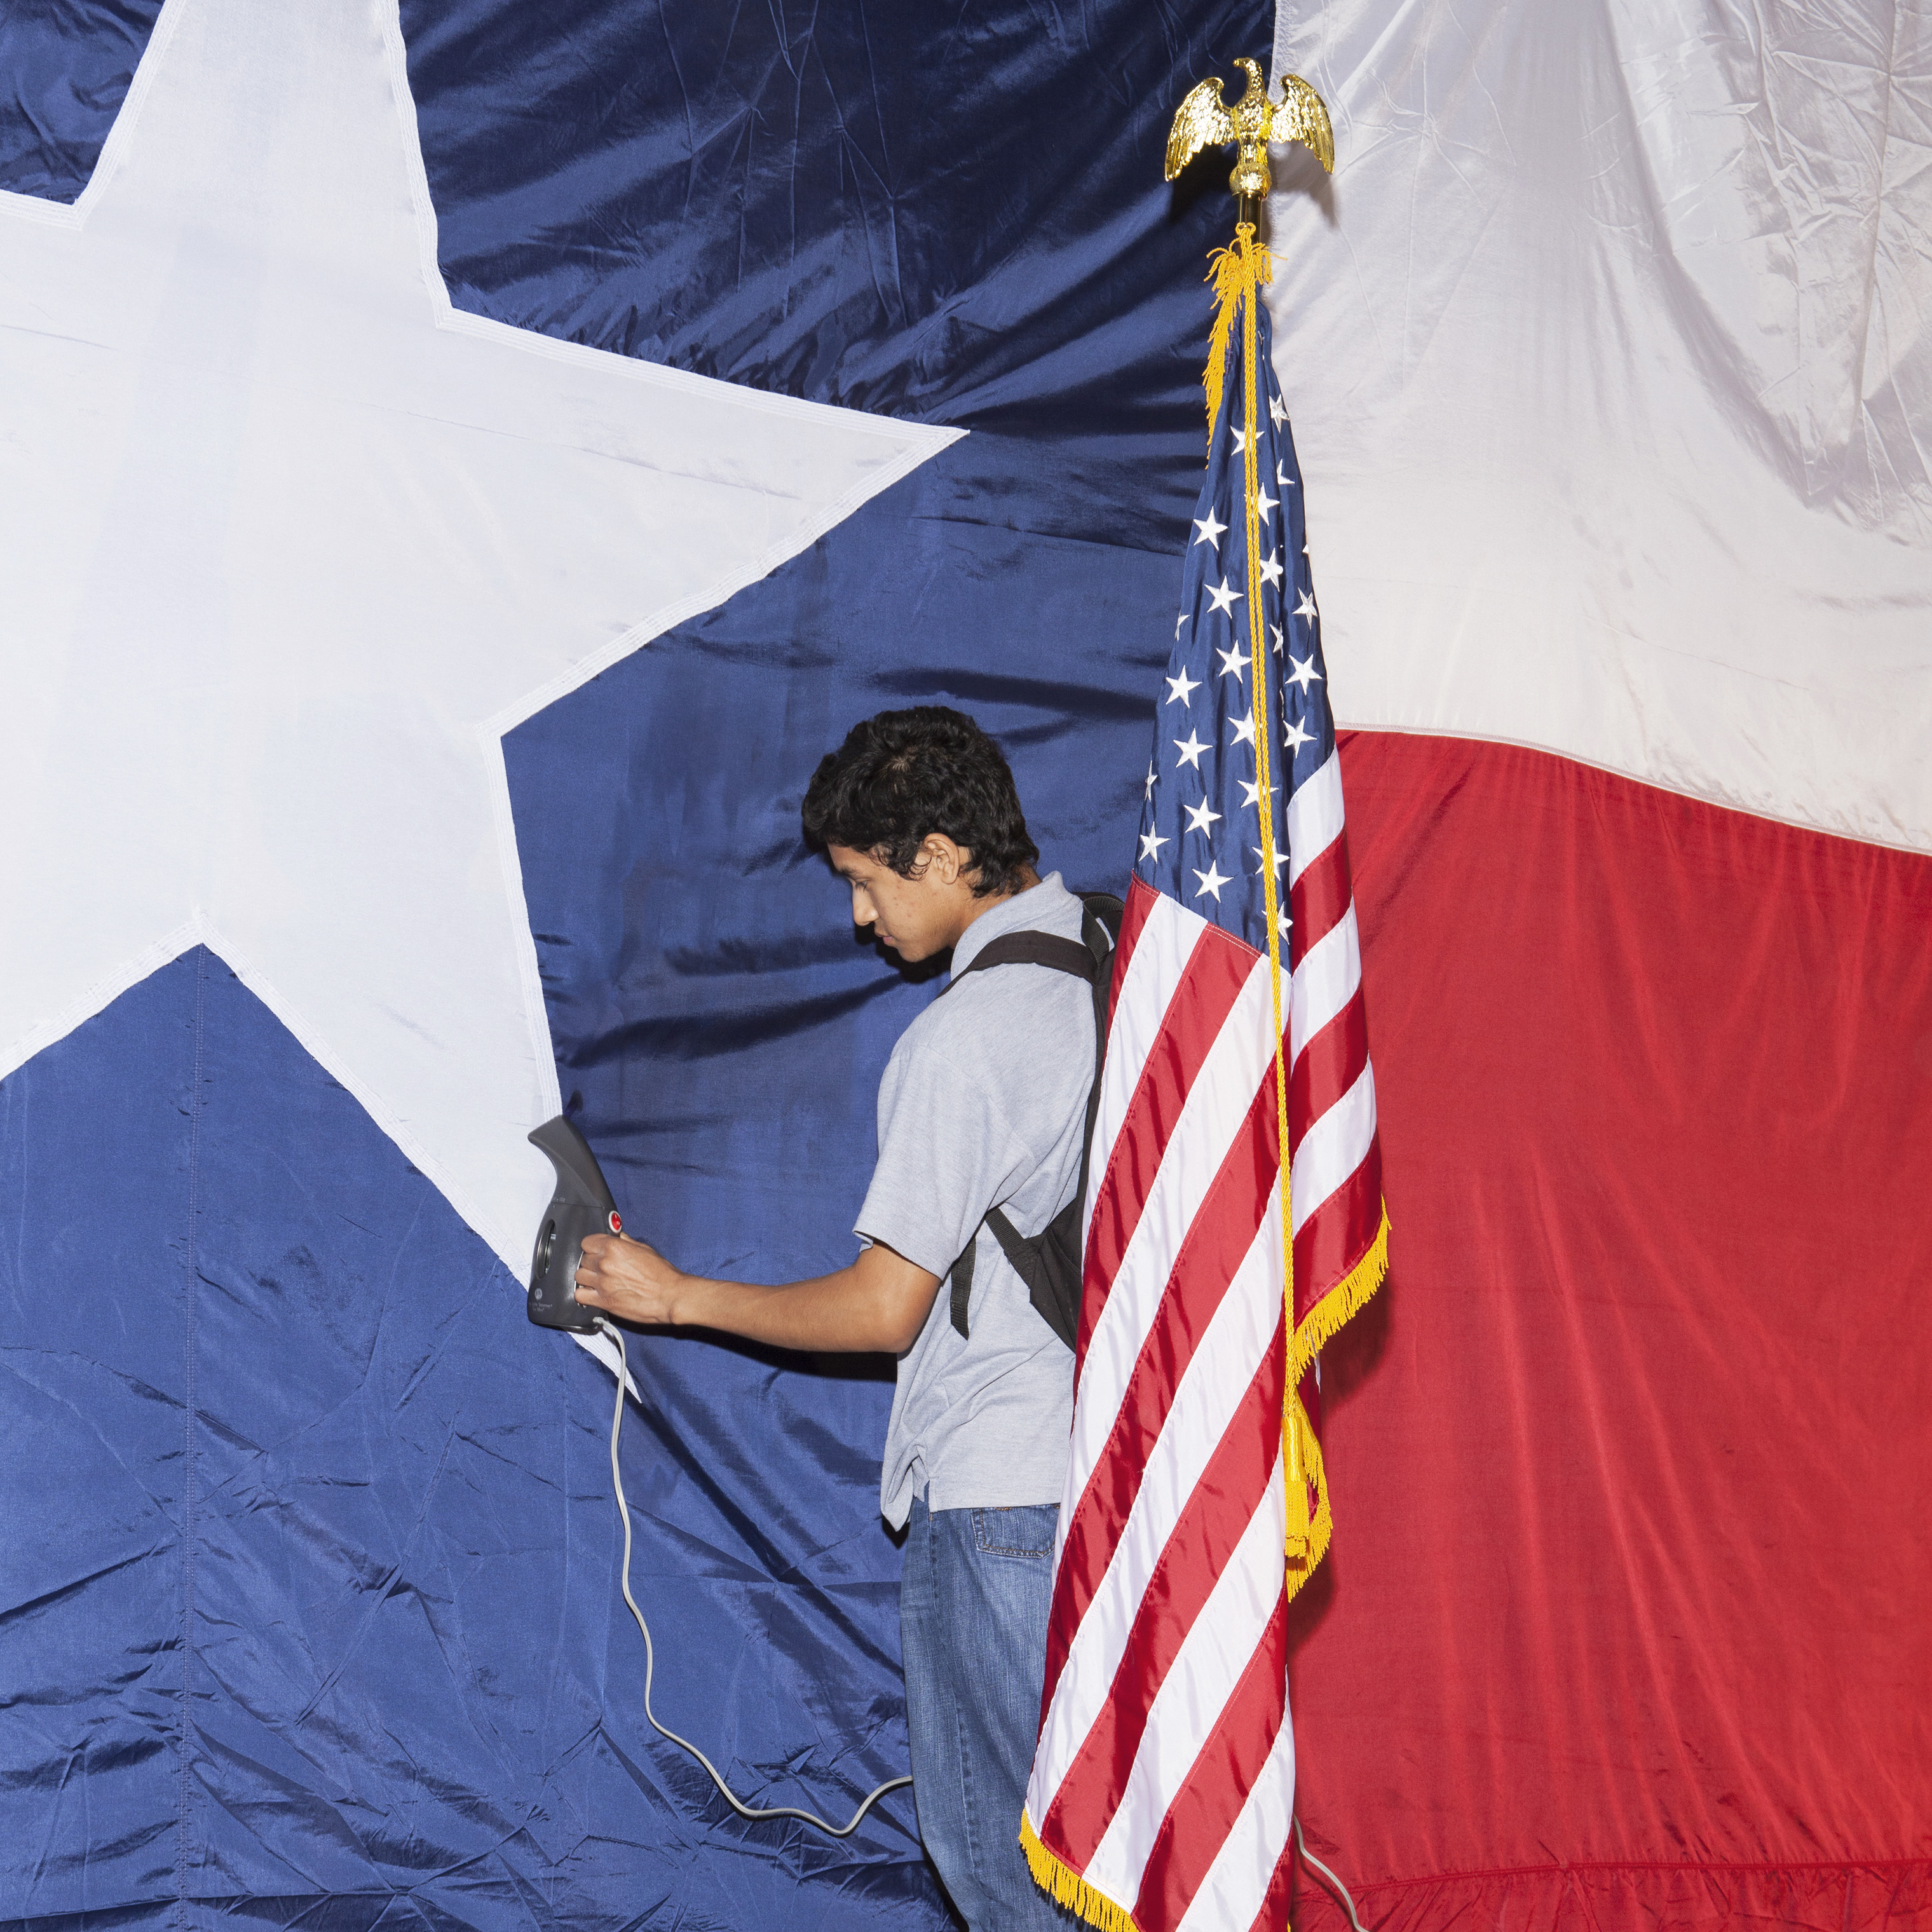 Jose Maybit Lopez, an intern for Texas Sen. Ted Cruz, steams a flag in preparation for the Election Night party in Houston. (Brent Humphreys for TIME)